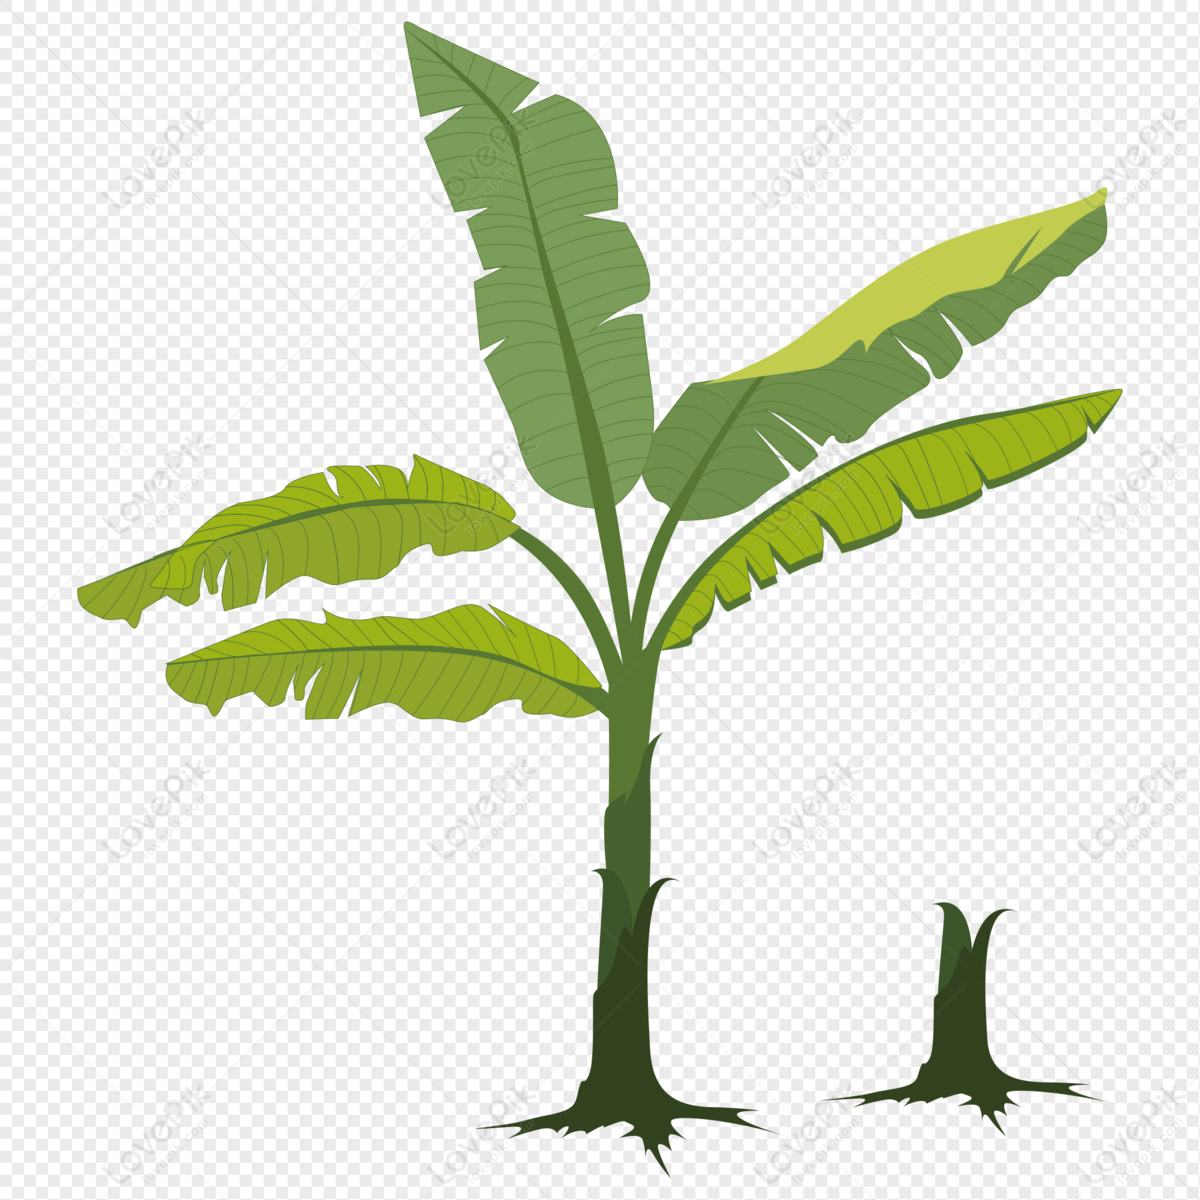 Banana Tree Illustration PNG Images With Transparent Background | Free ...